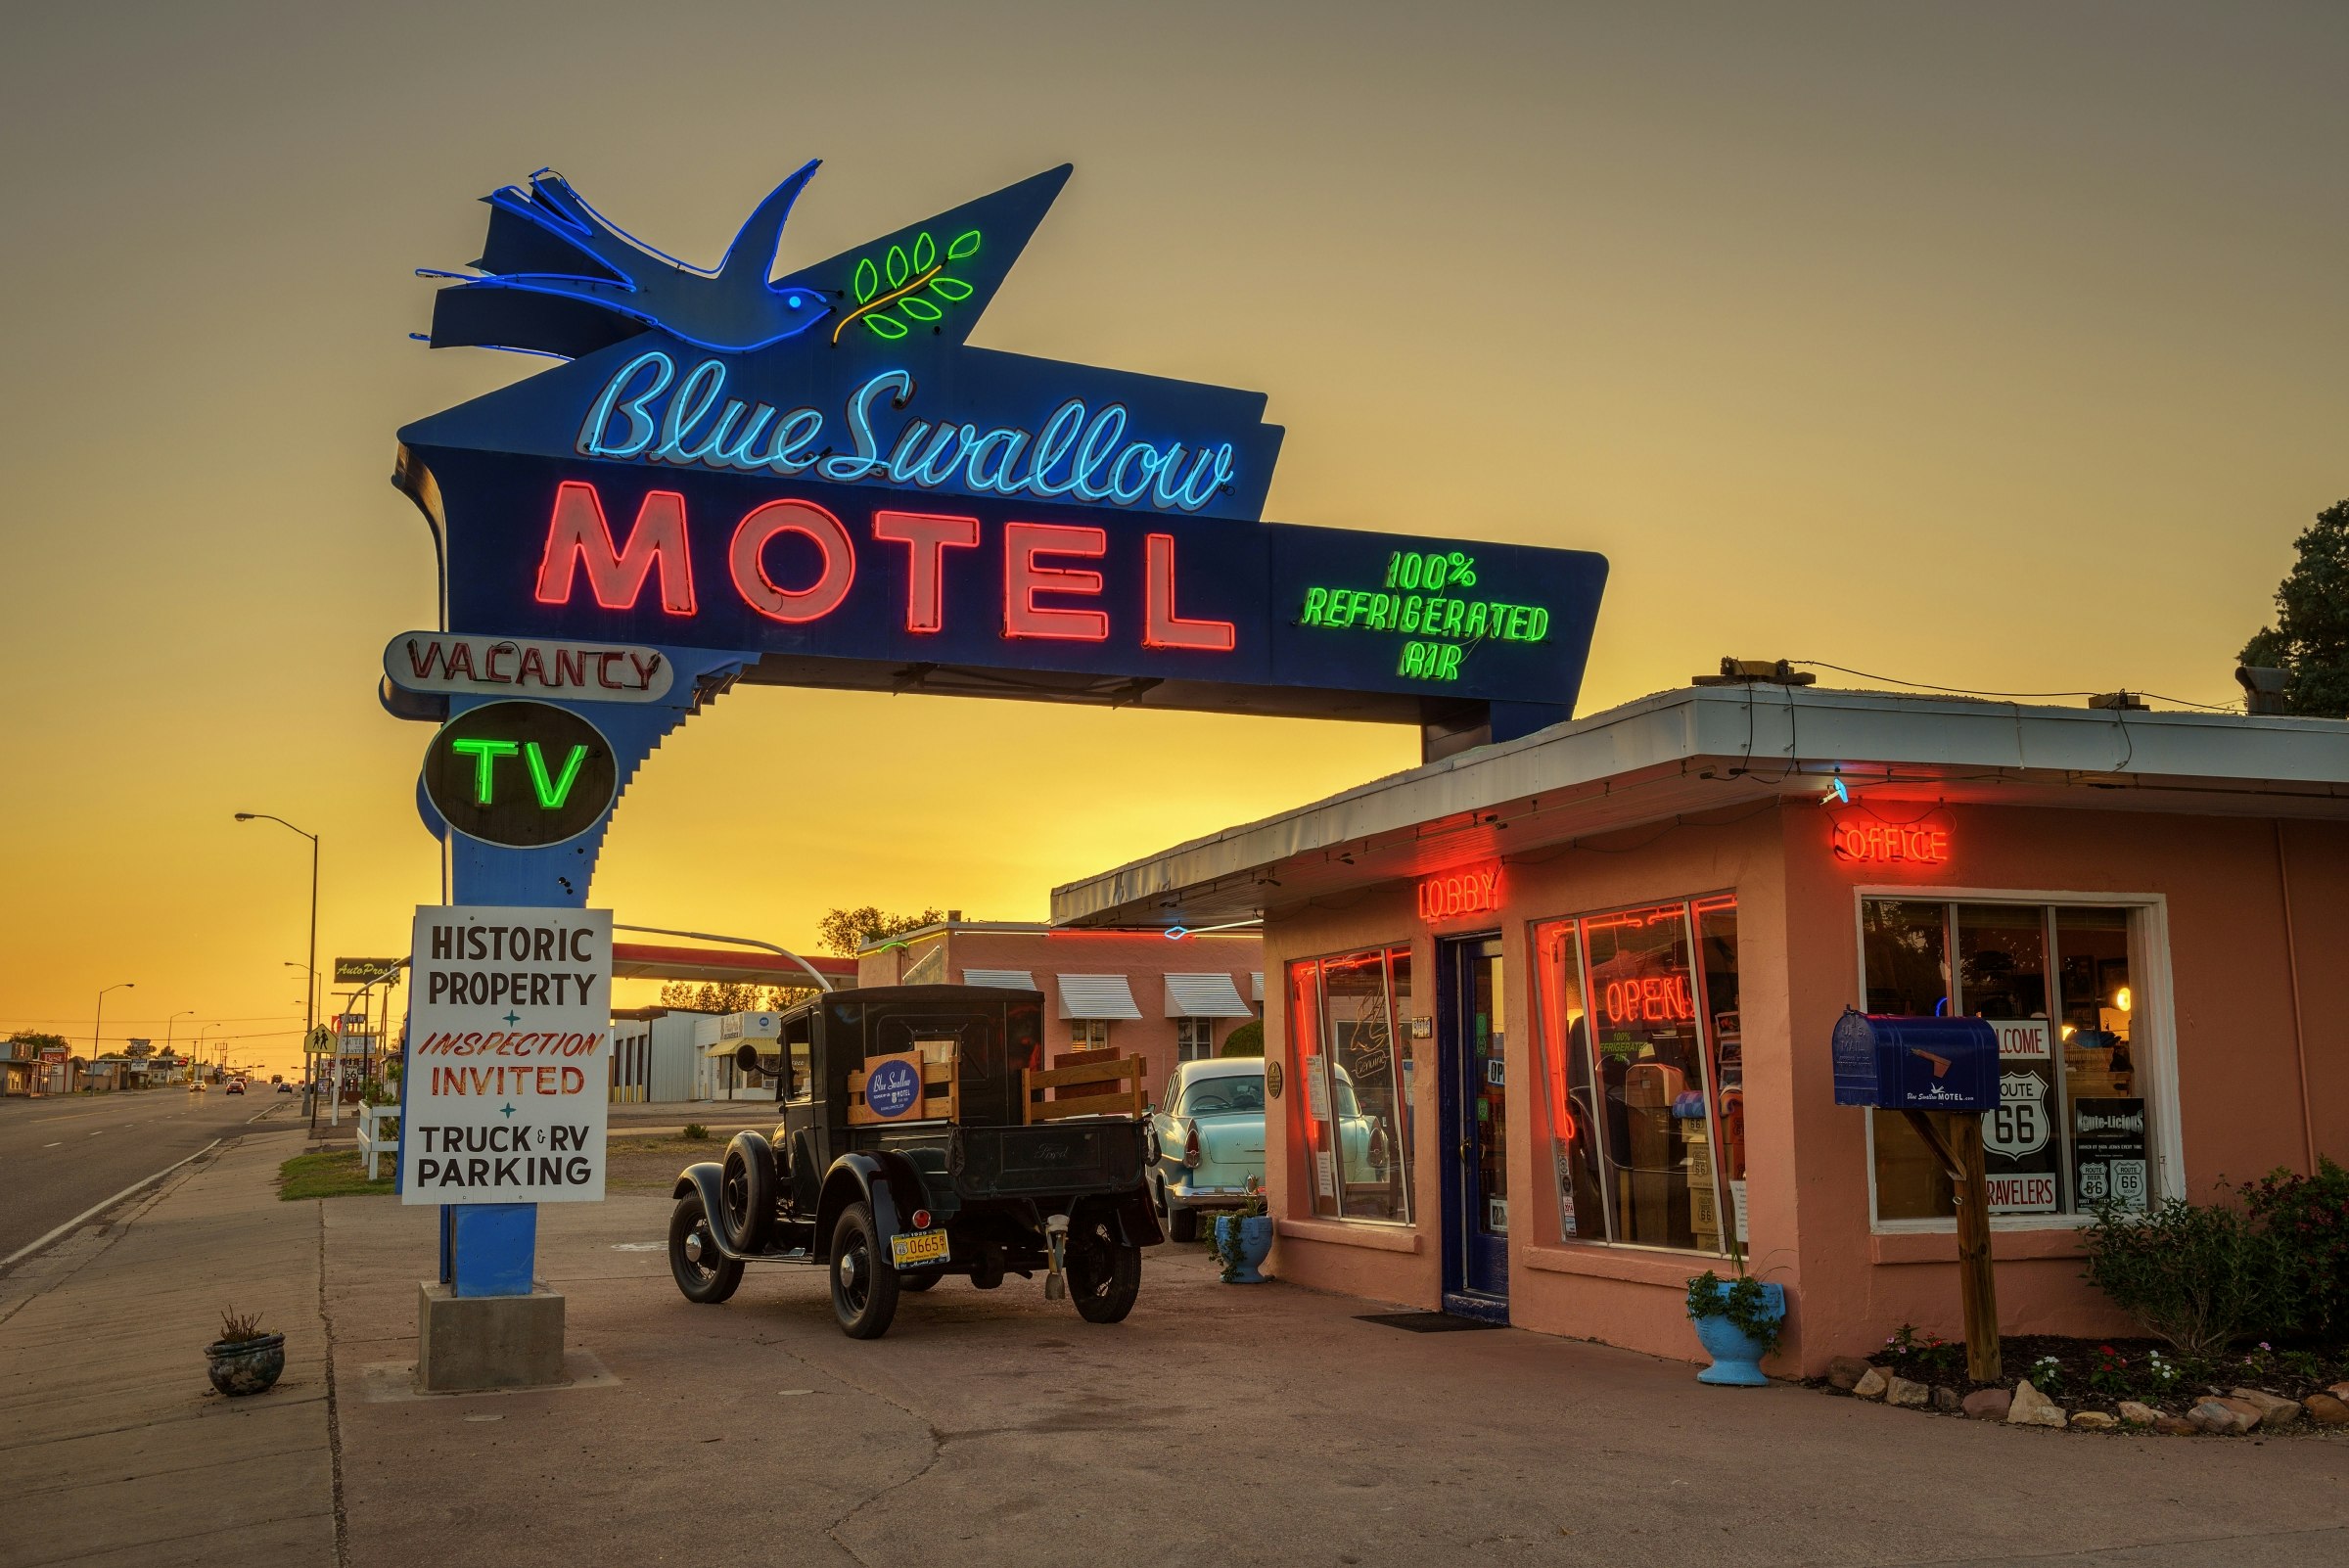 An exterior shot of the Blue Swallow Motel in New Mexico. The motel is small but has a large neon sign that attracts the attention of motorists, driving along the highway next to the motel.